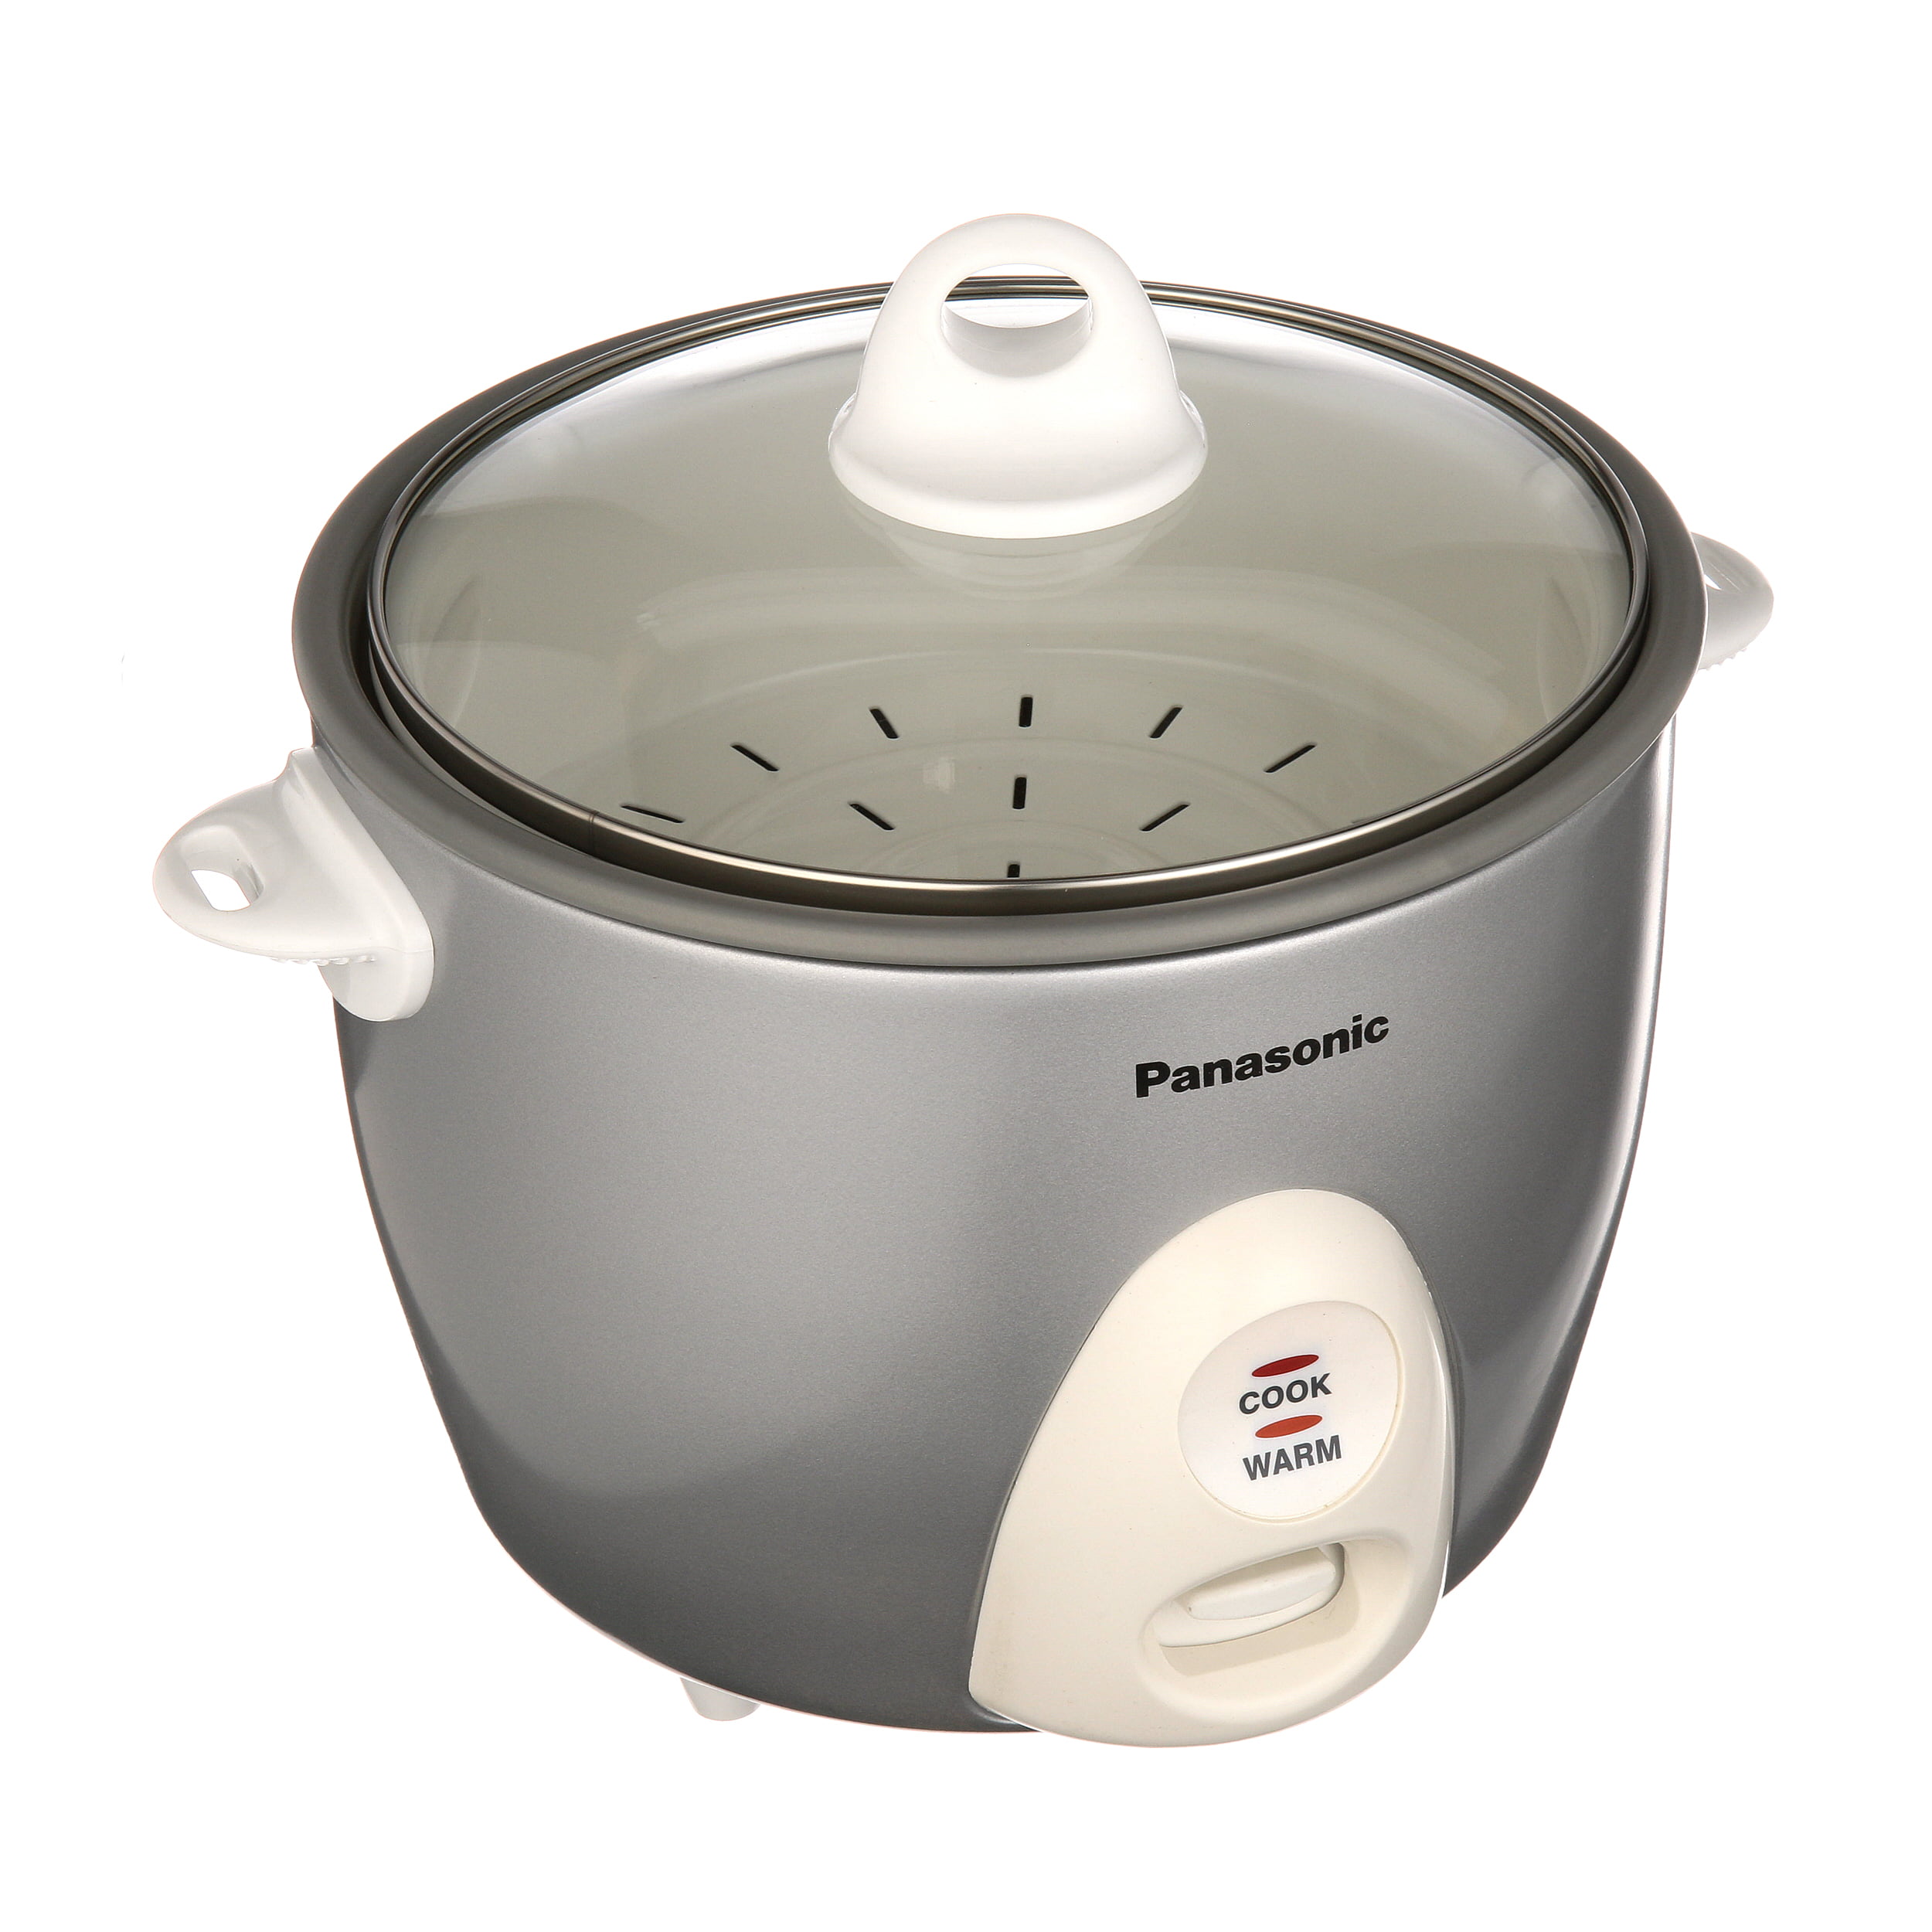 Panasonic 5-Cup Uncooked Rice and Grains Multi-Cooker at Tractor